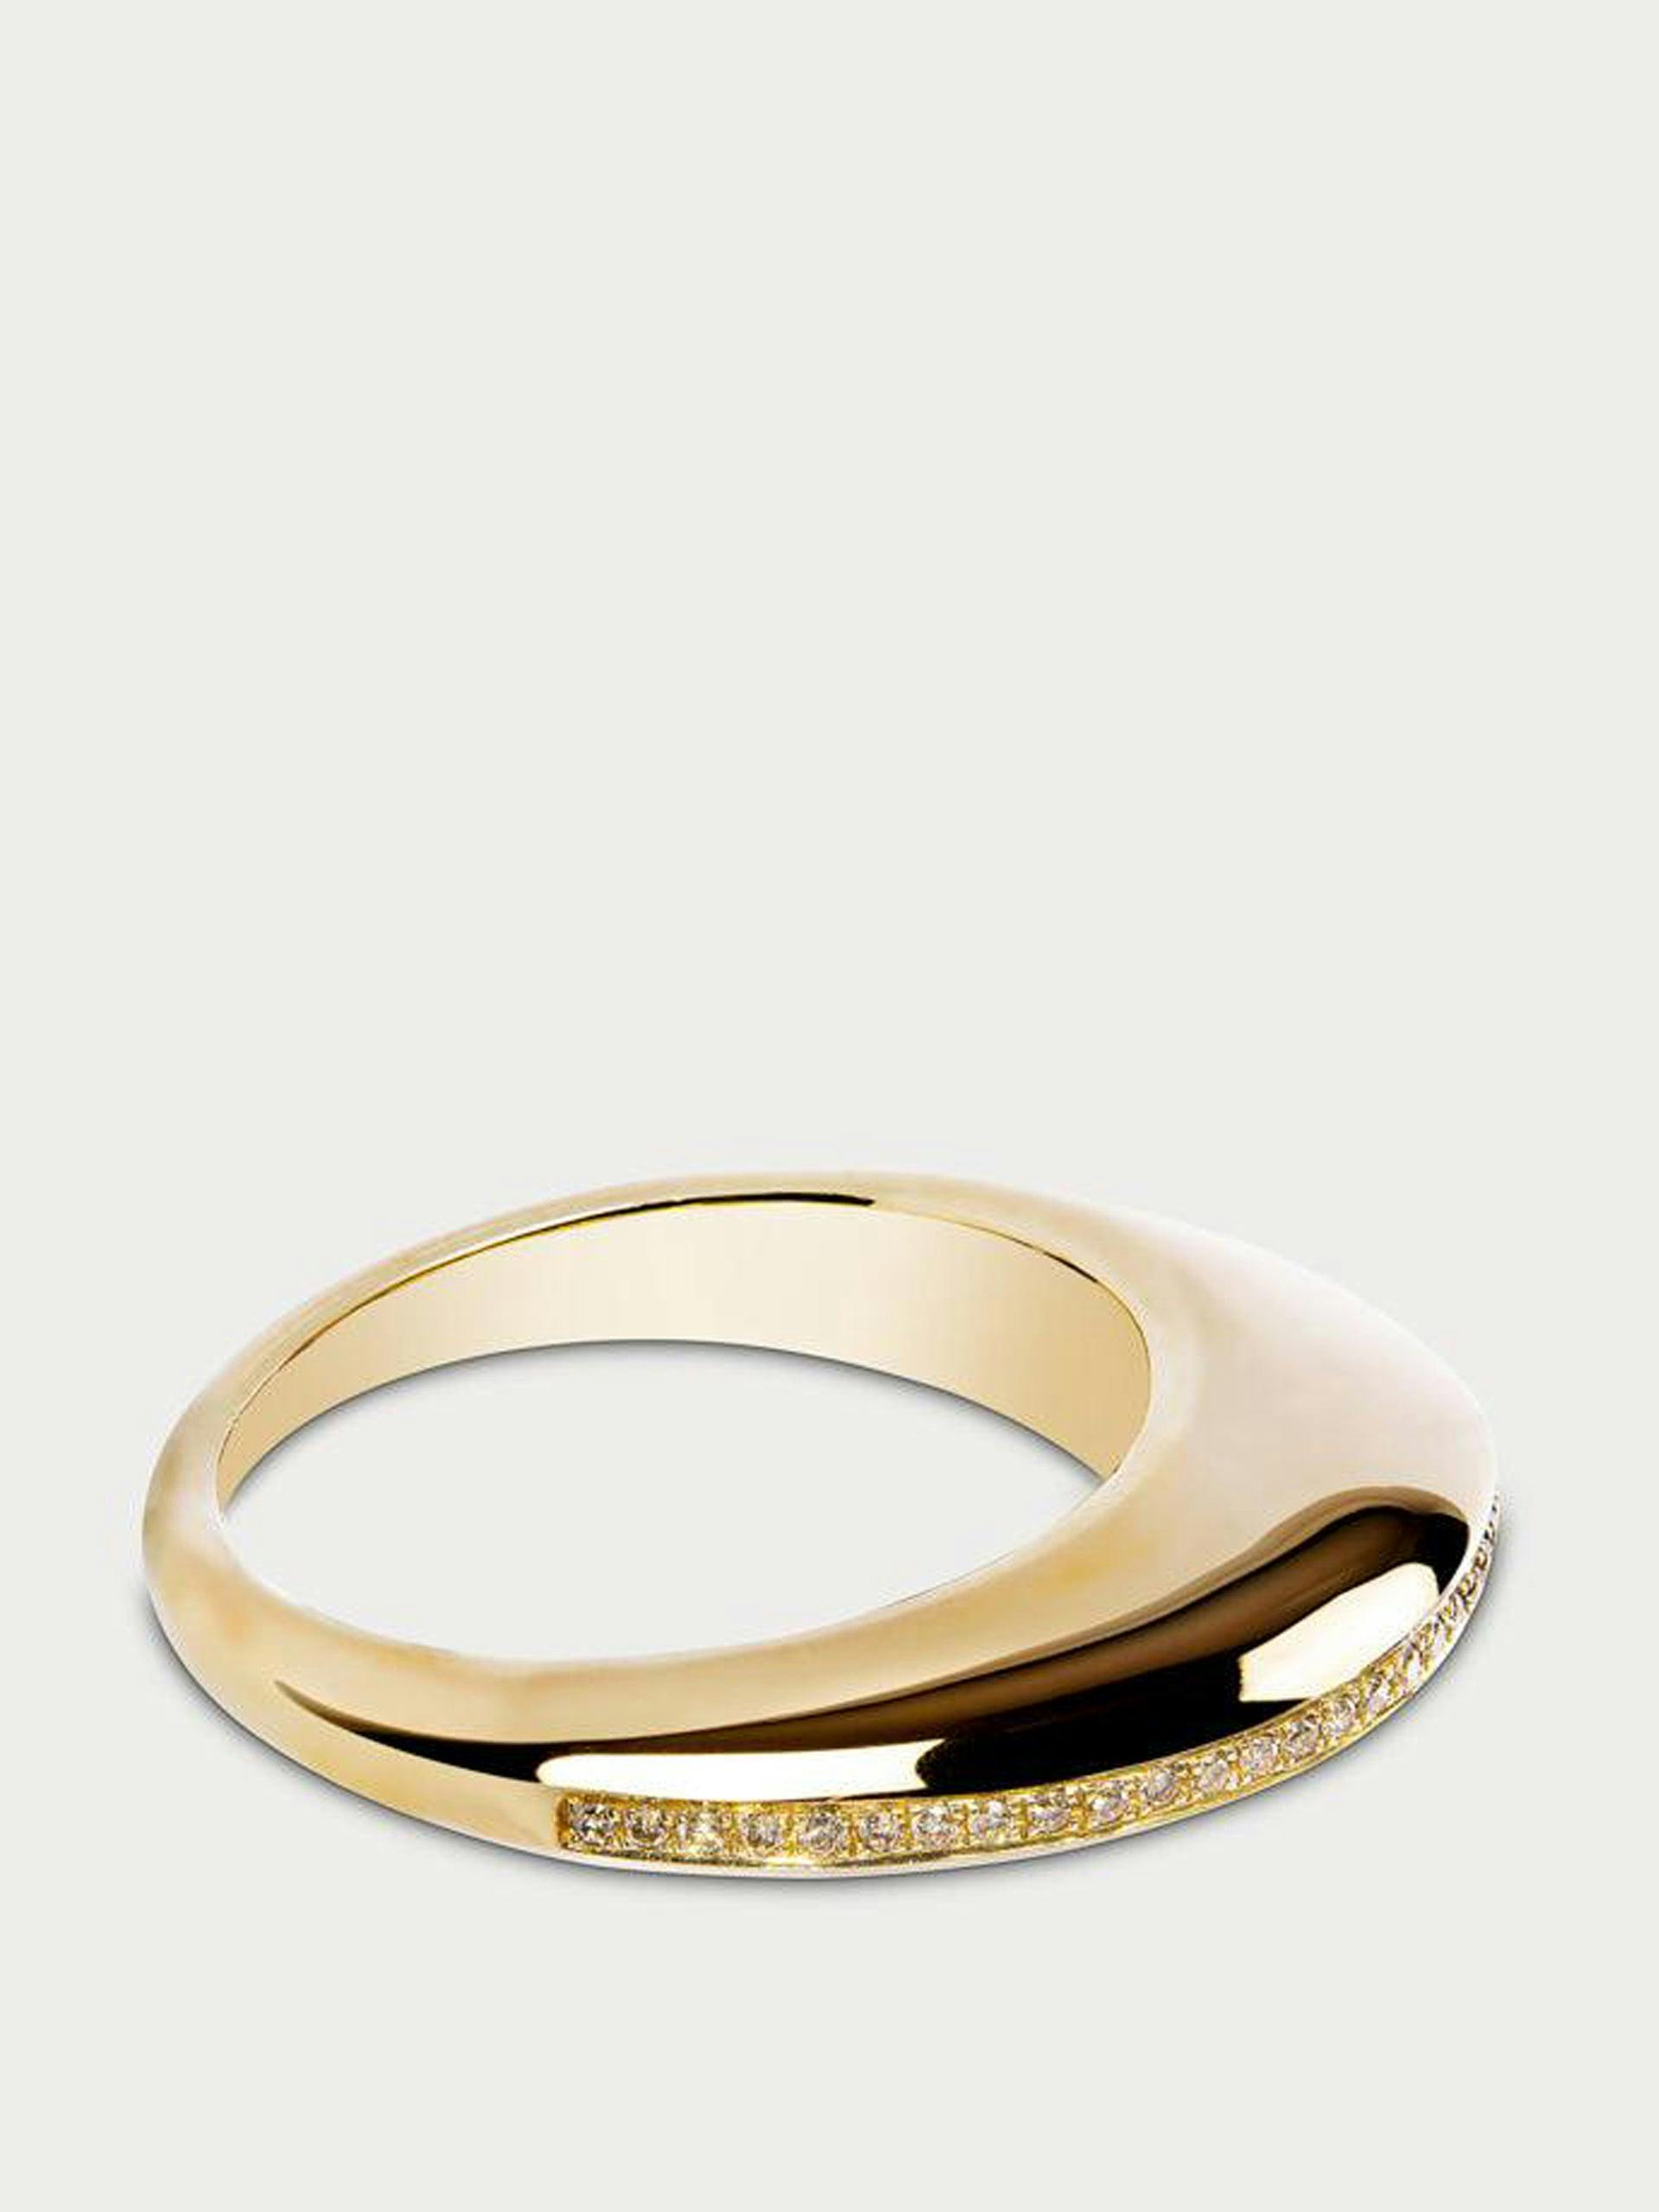 Gold Linings ring